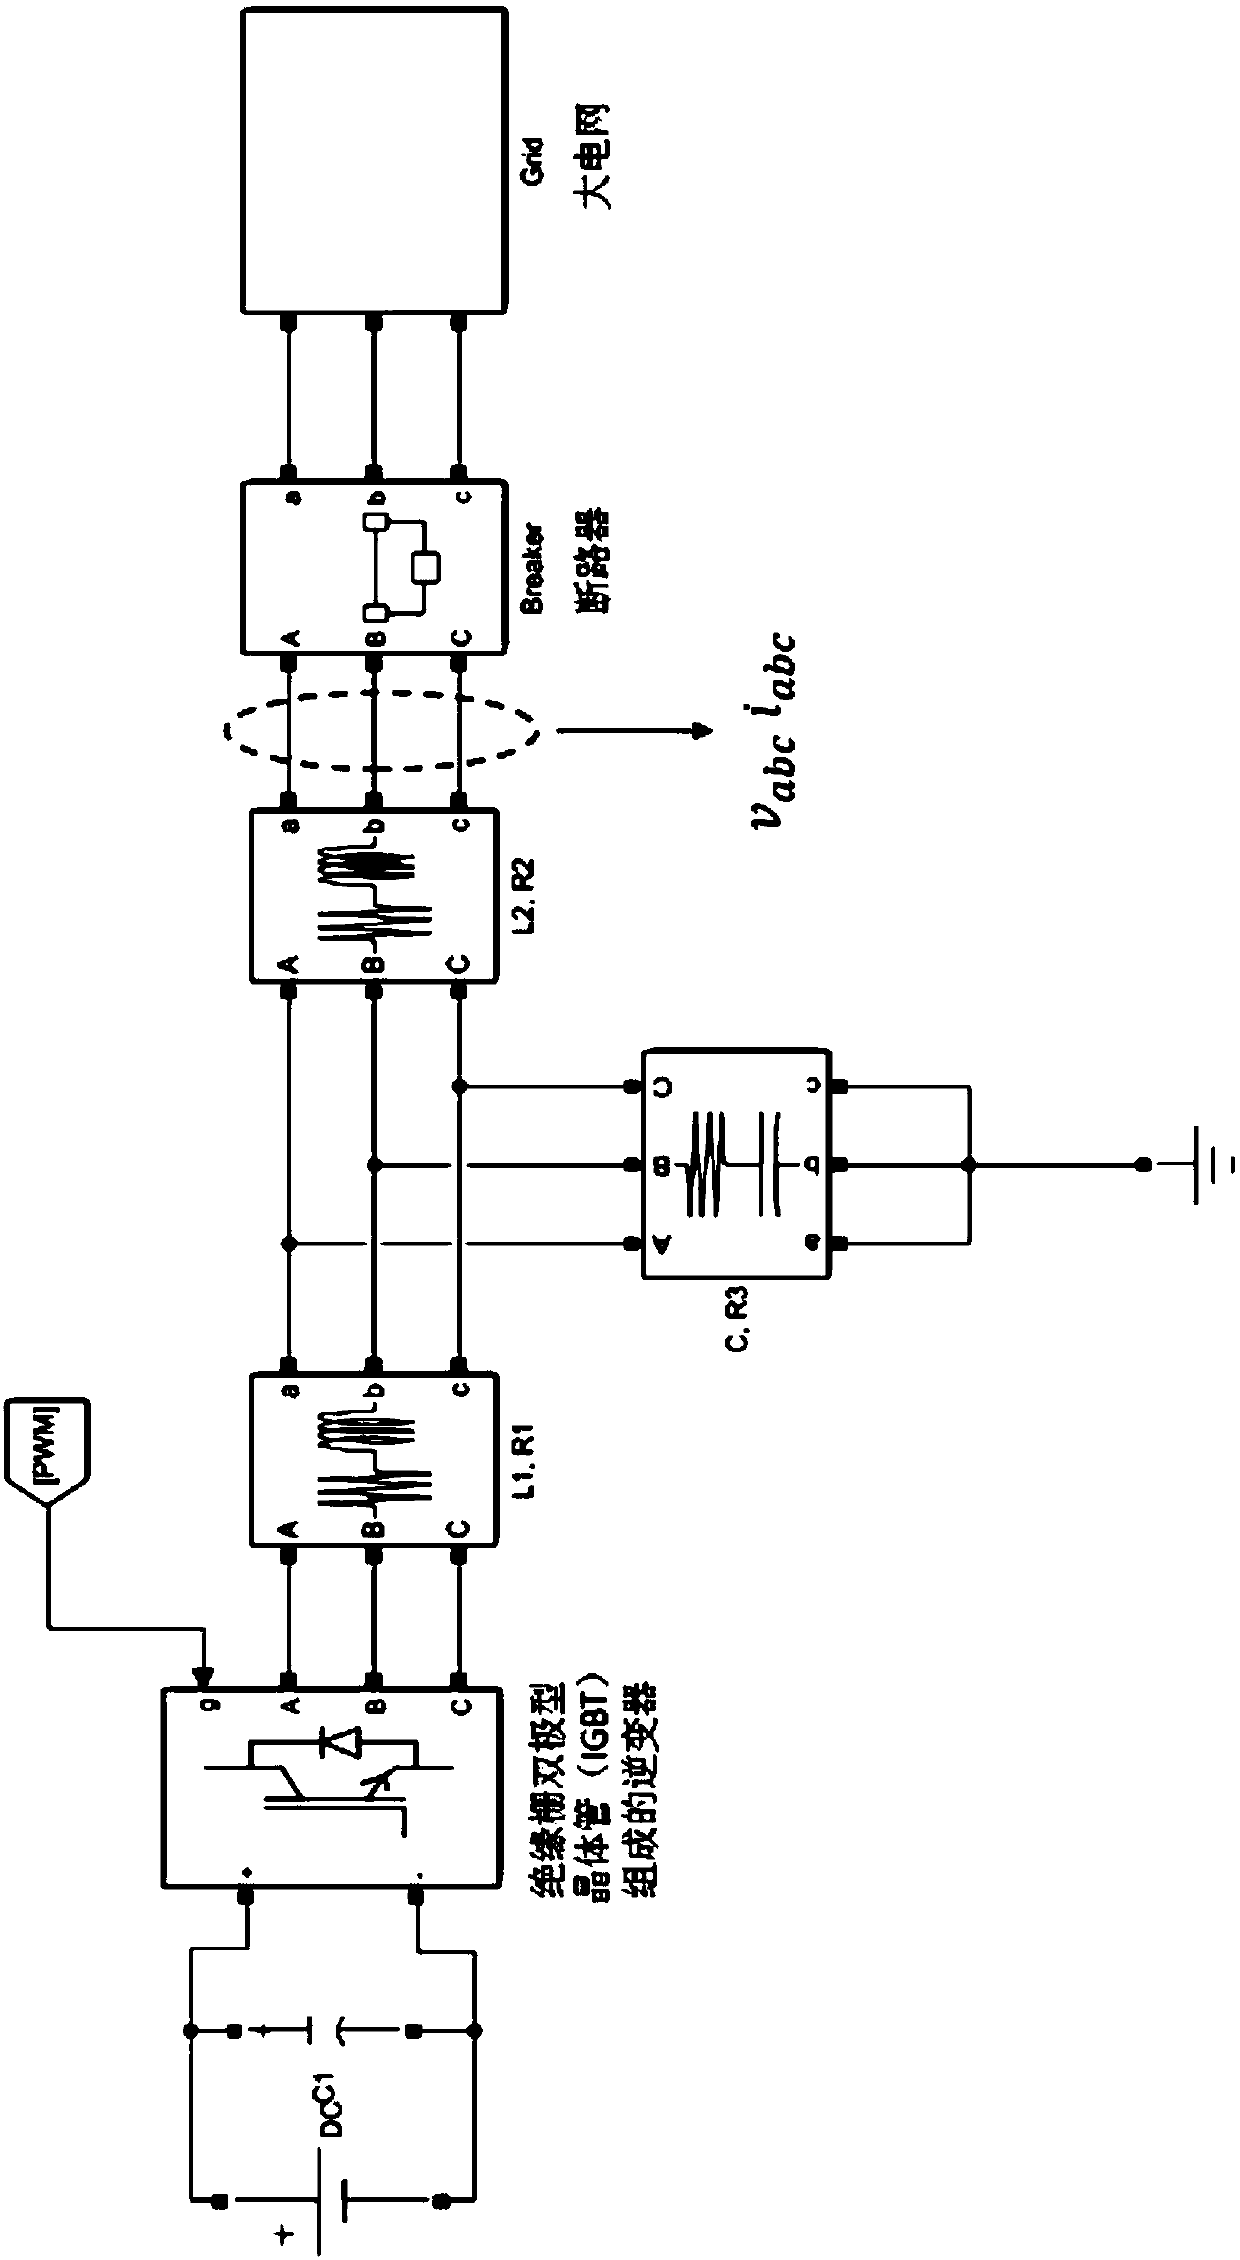 Nonlinear adaptive PQ control method of inverter in grid-connected state